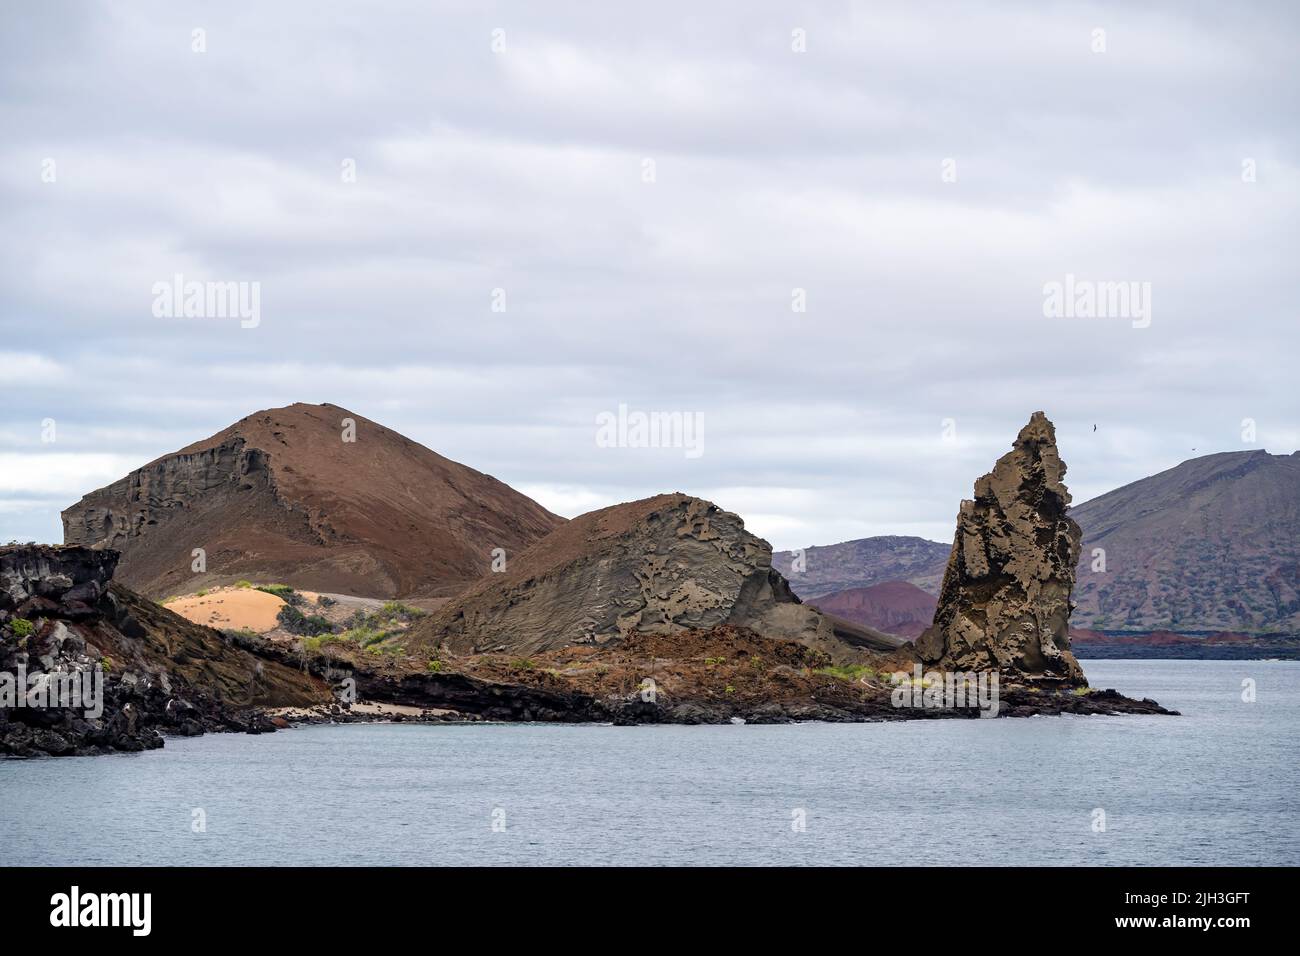 Pinnacle Rock landscape on Bartolome Island in the Galapagos Stock Photo